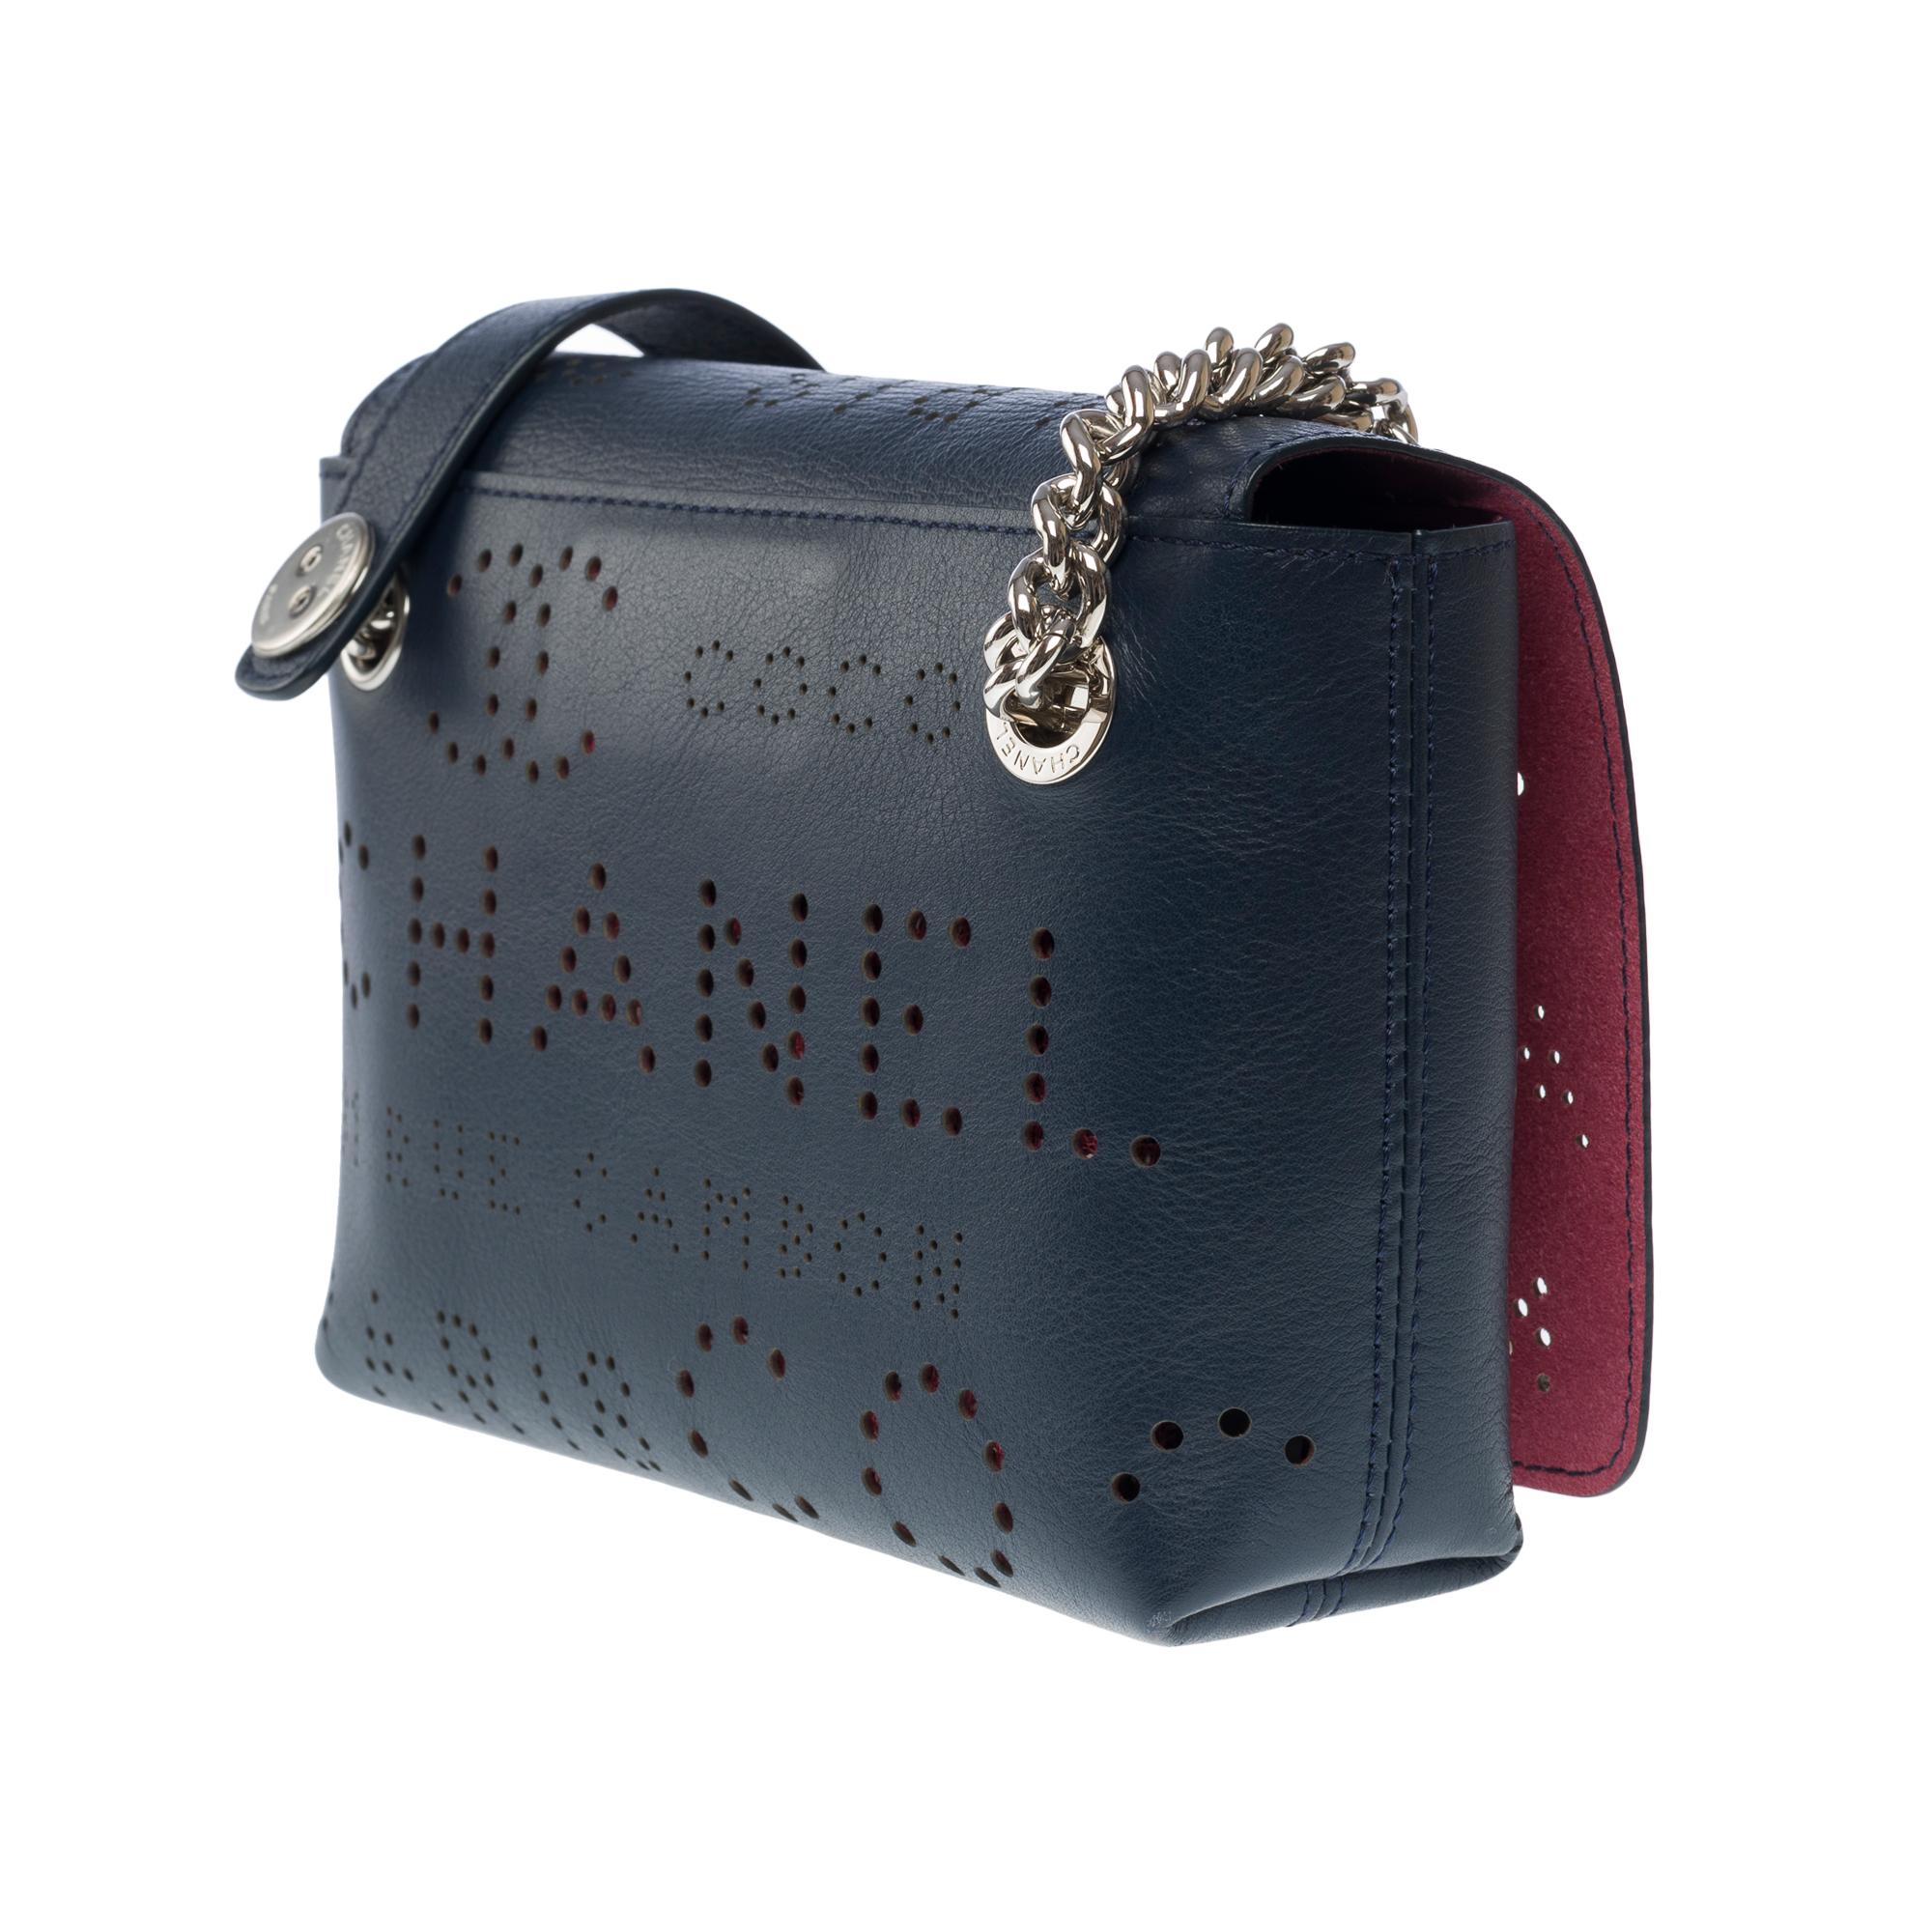 Chanel Classic shoulder flap bag in Navy blue perforated leather, SHW For Sale 2